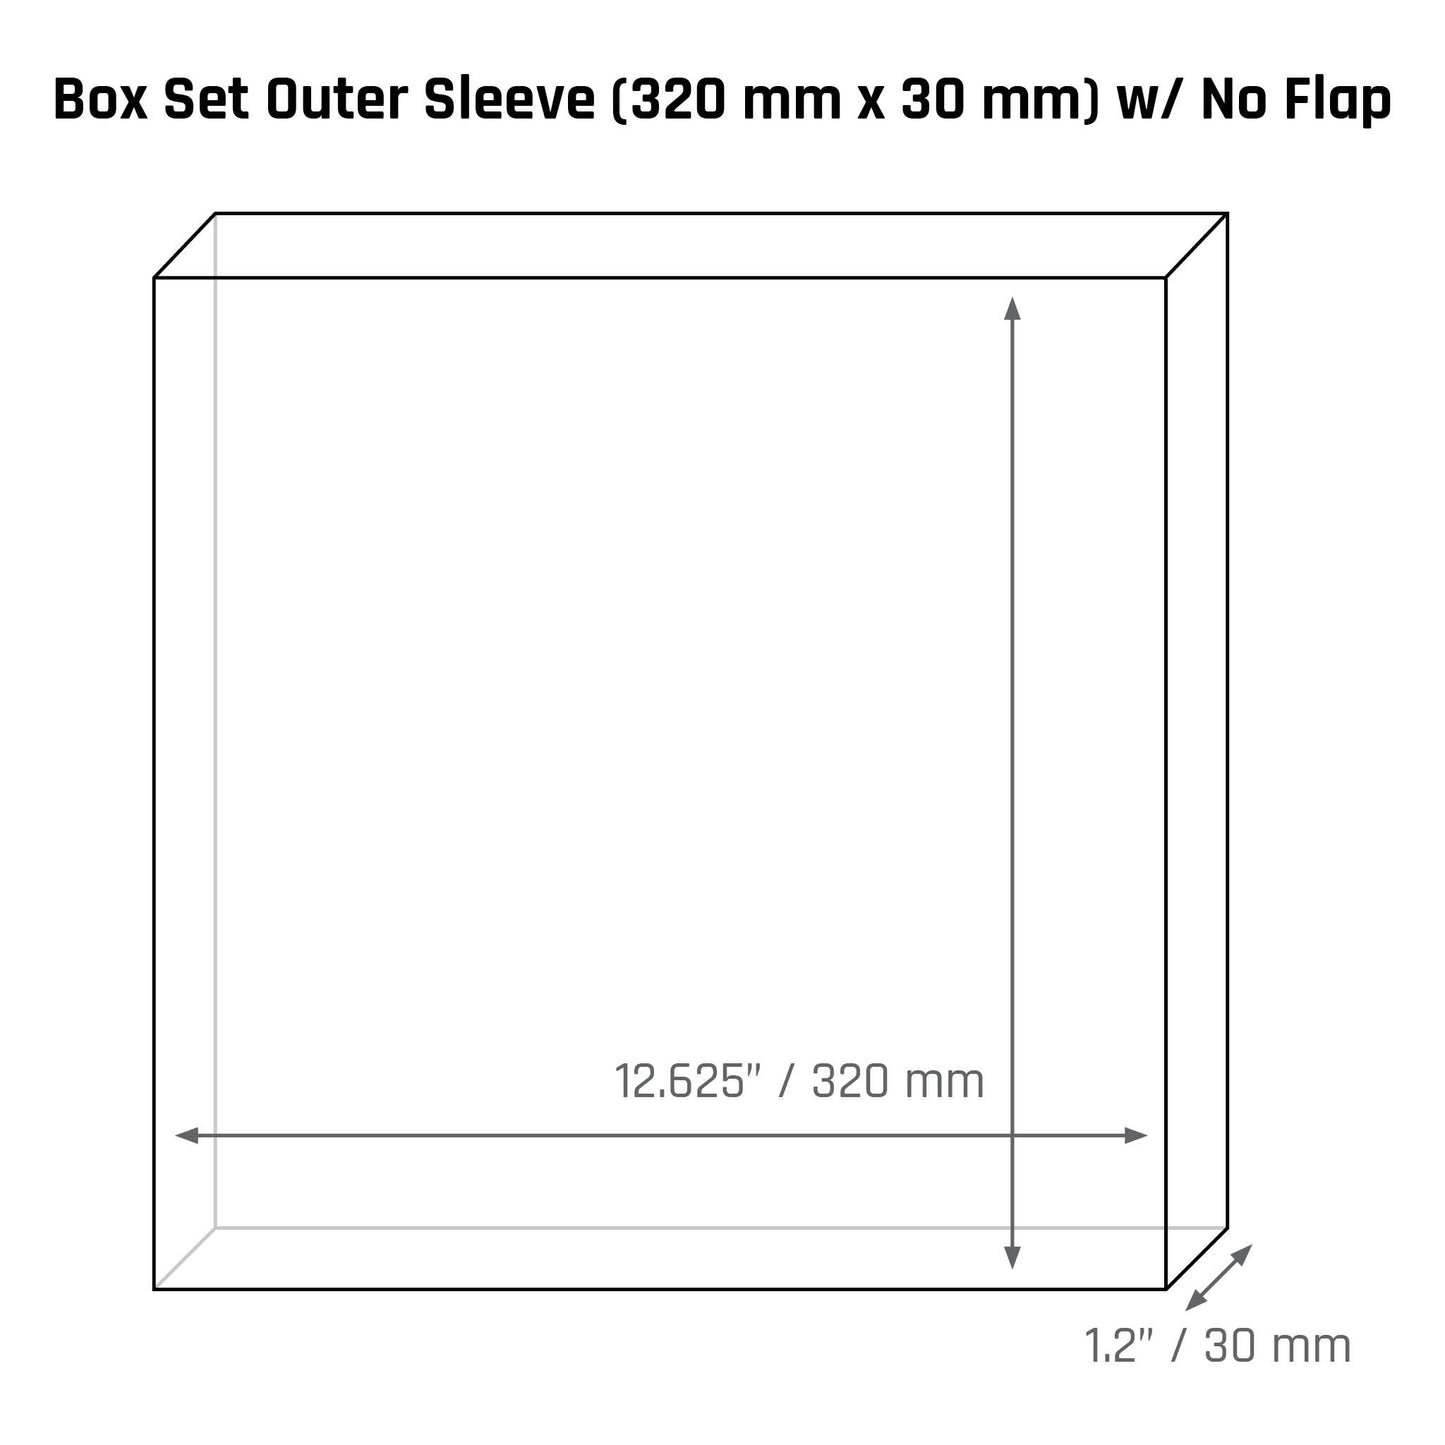 Box Set Outer Sleeve (320 mm x 30 mm) - 3mil